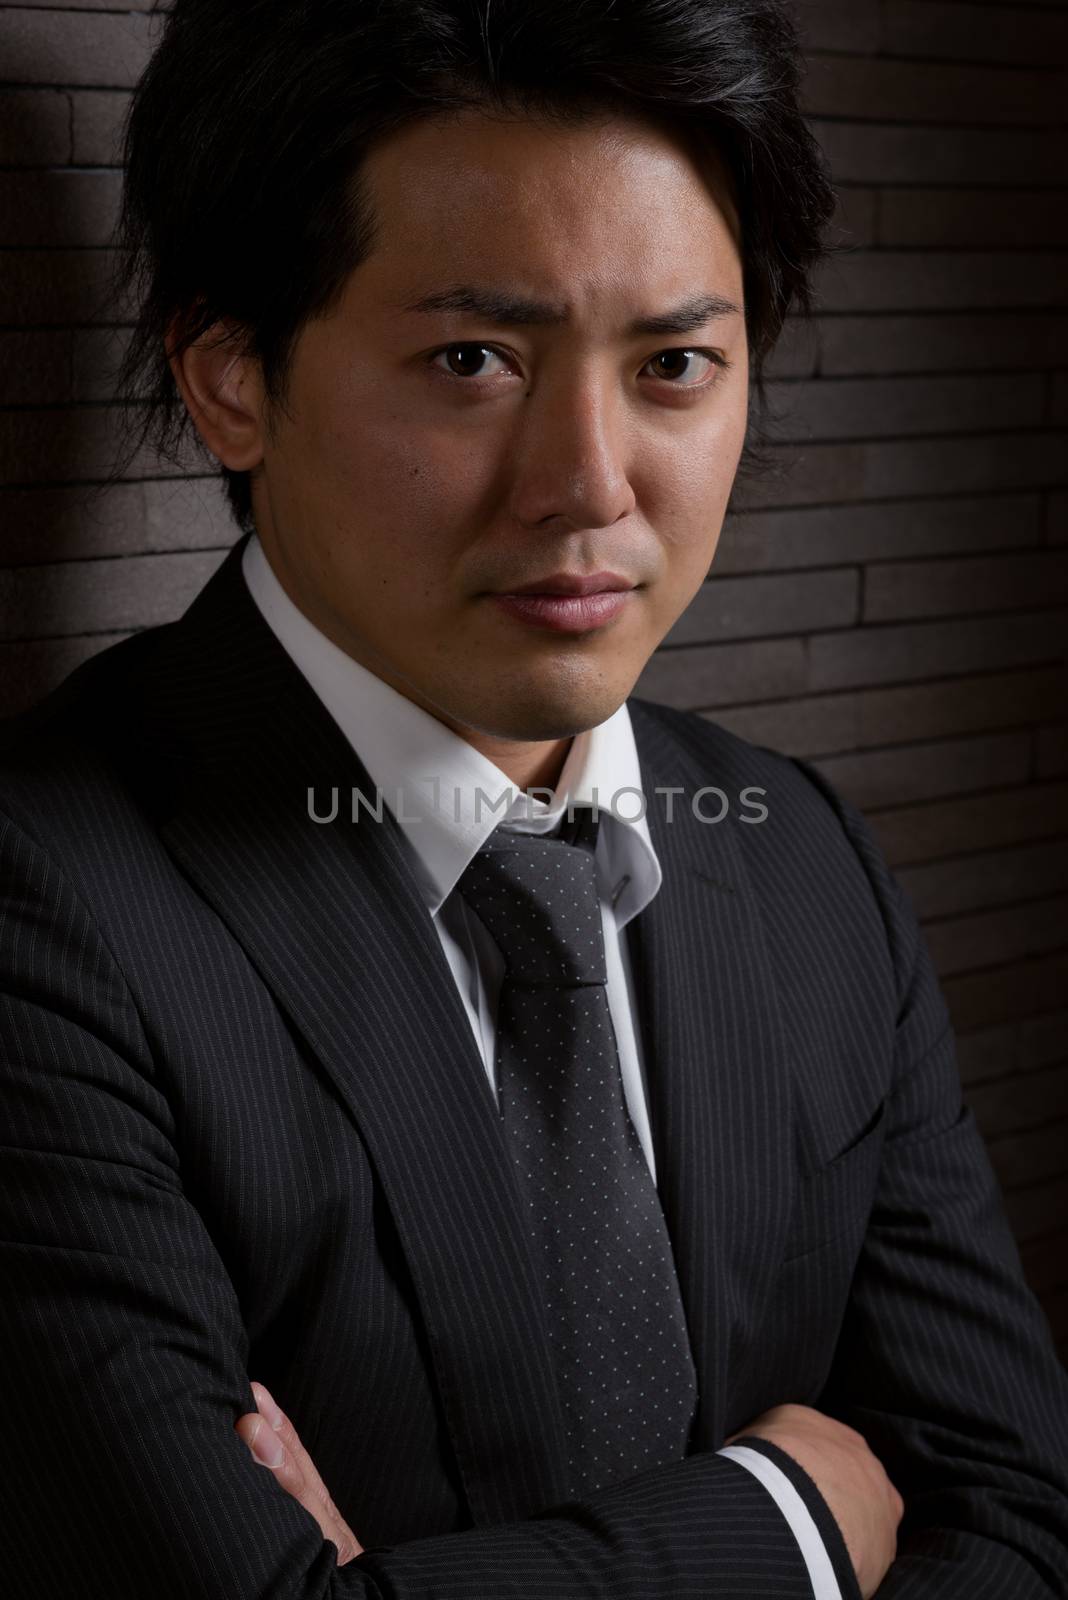 A low key portrait of a young Japanese man in a business suit with a serious expression on his face.